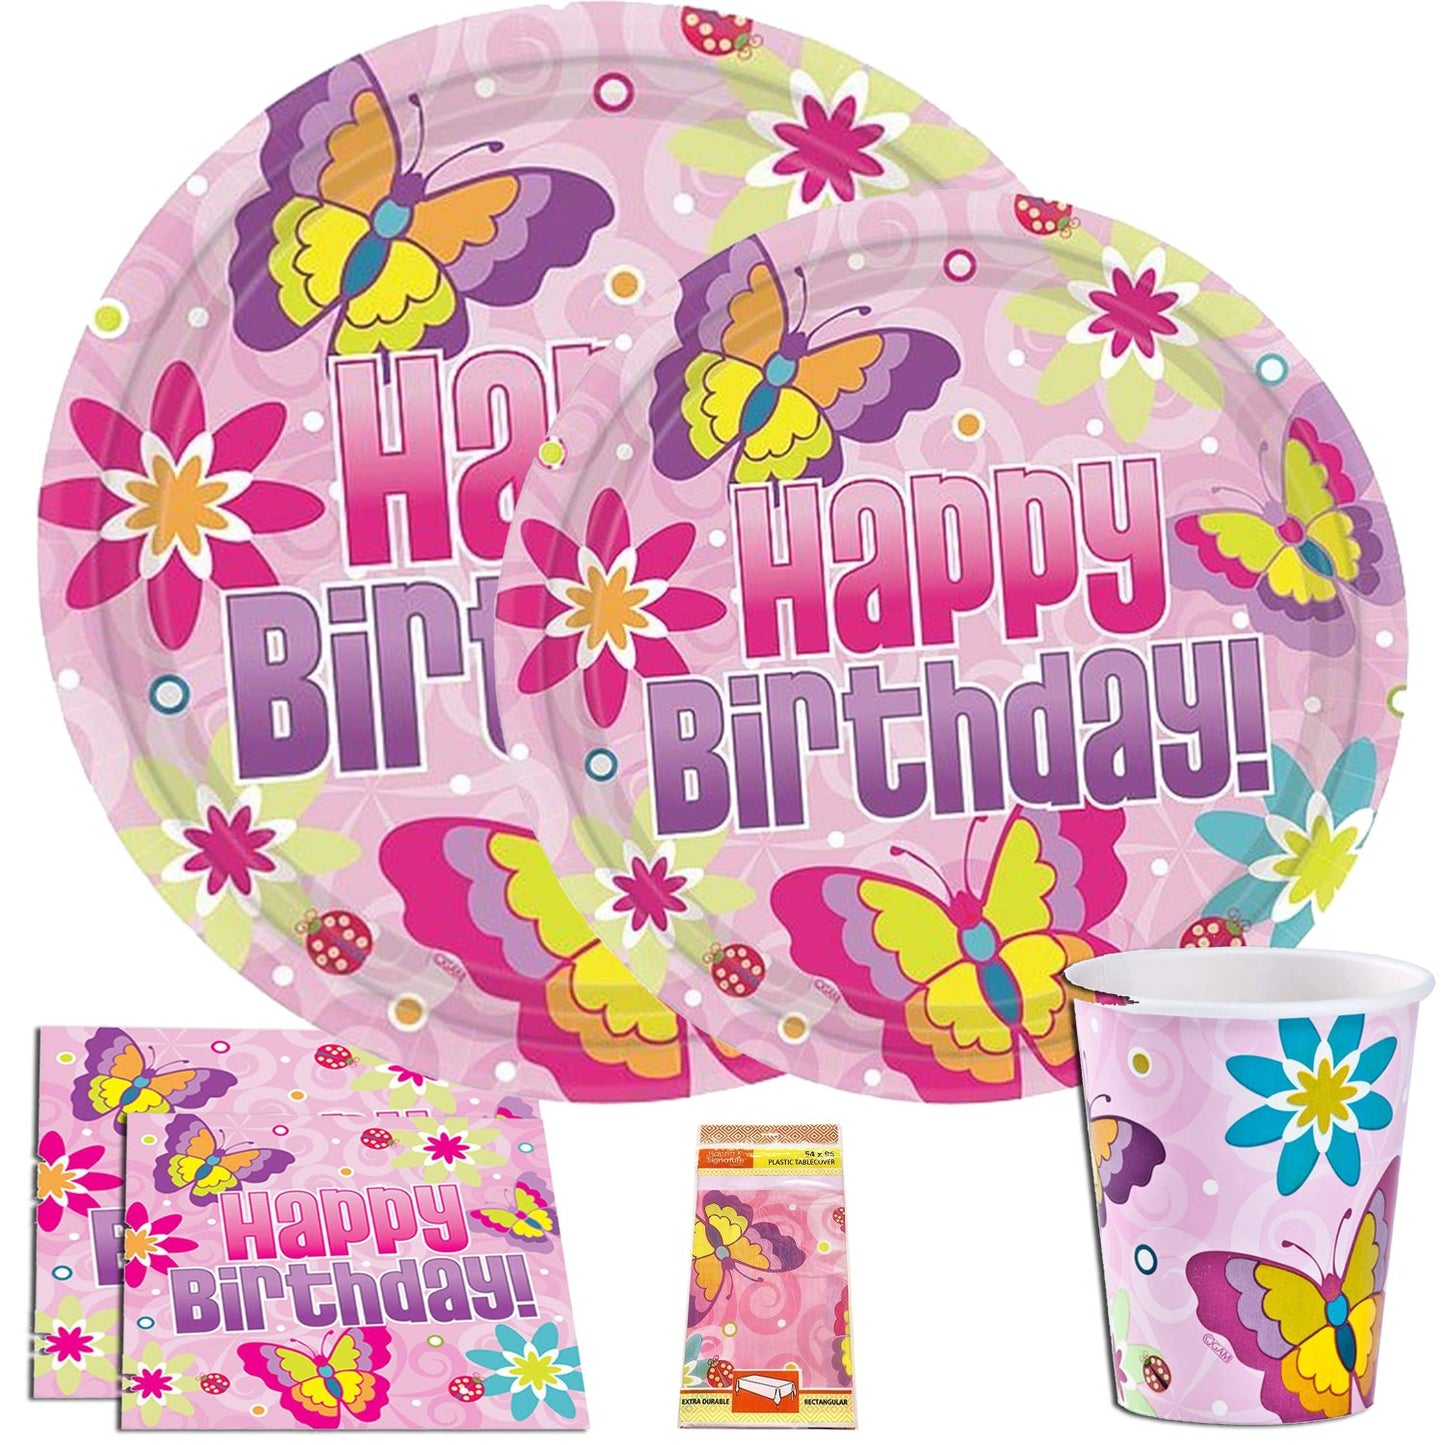 SALE Hanna K. Signature Bday Butterfly Plate 10.25" 18 count Disposable Hanna K Signature   